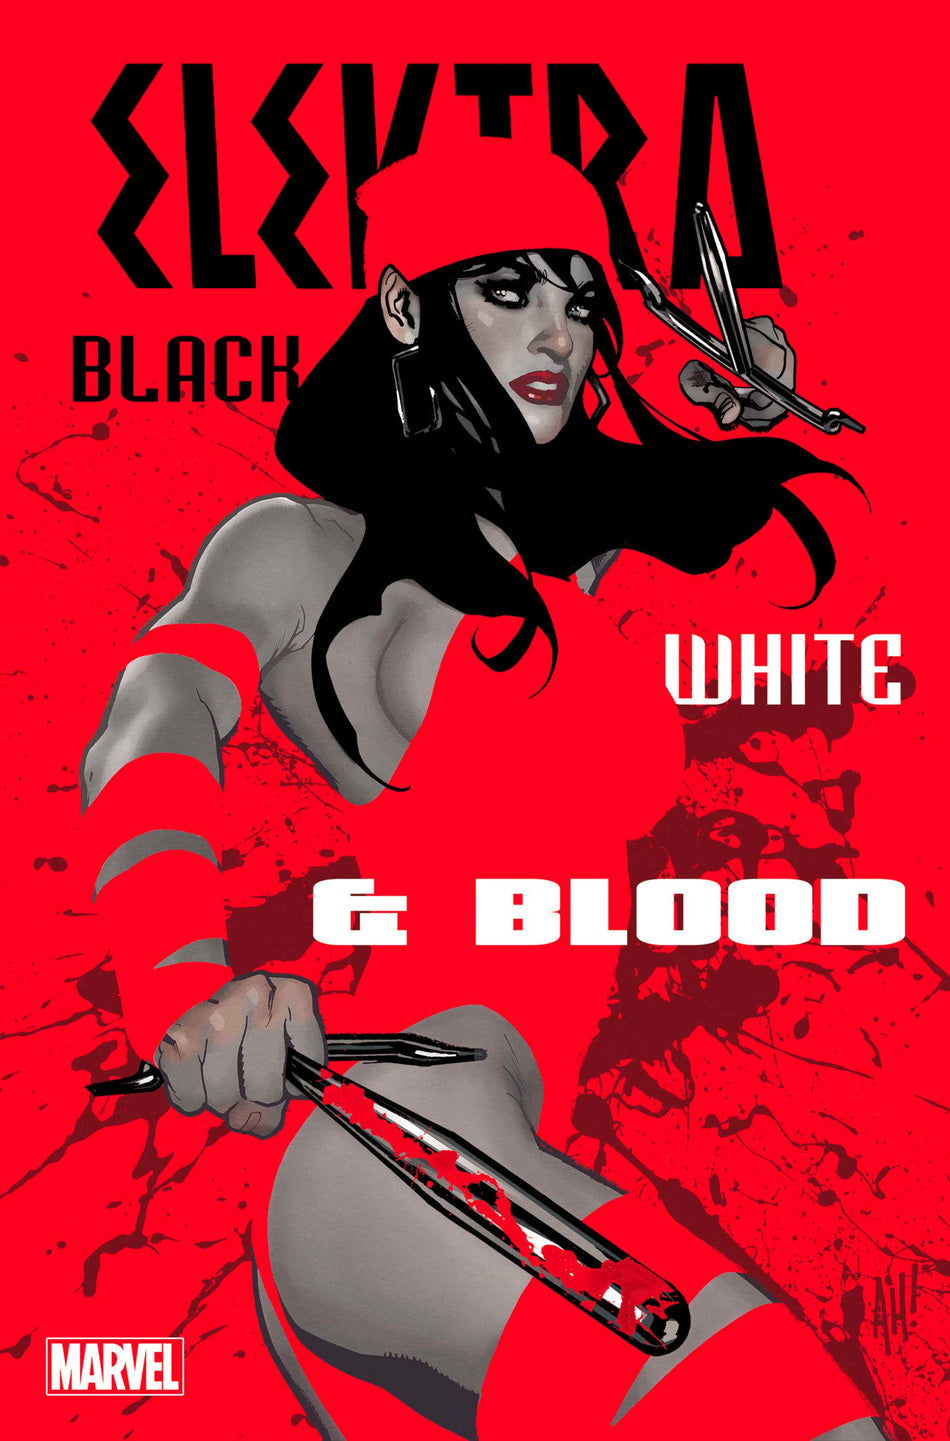 Image of Elektra: Black, White & Blood 2 comic sold by Stronghold Collectibles.